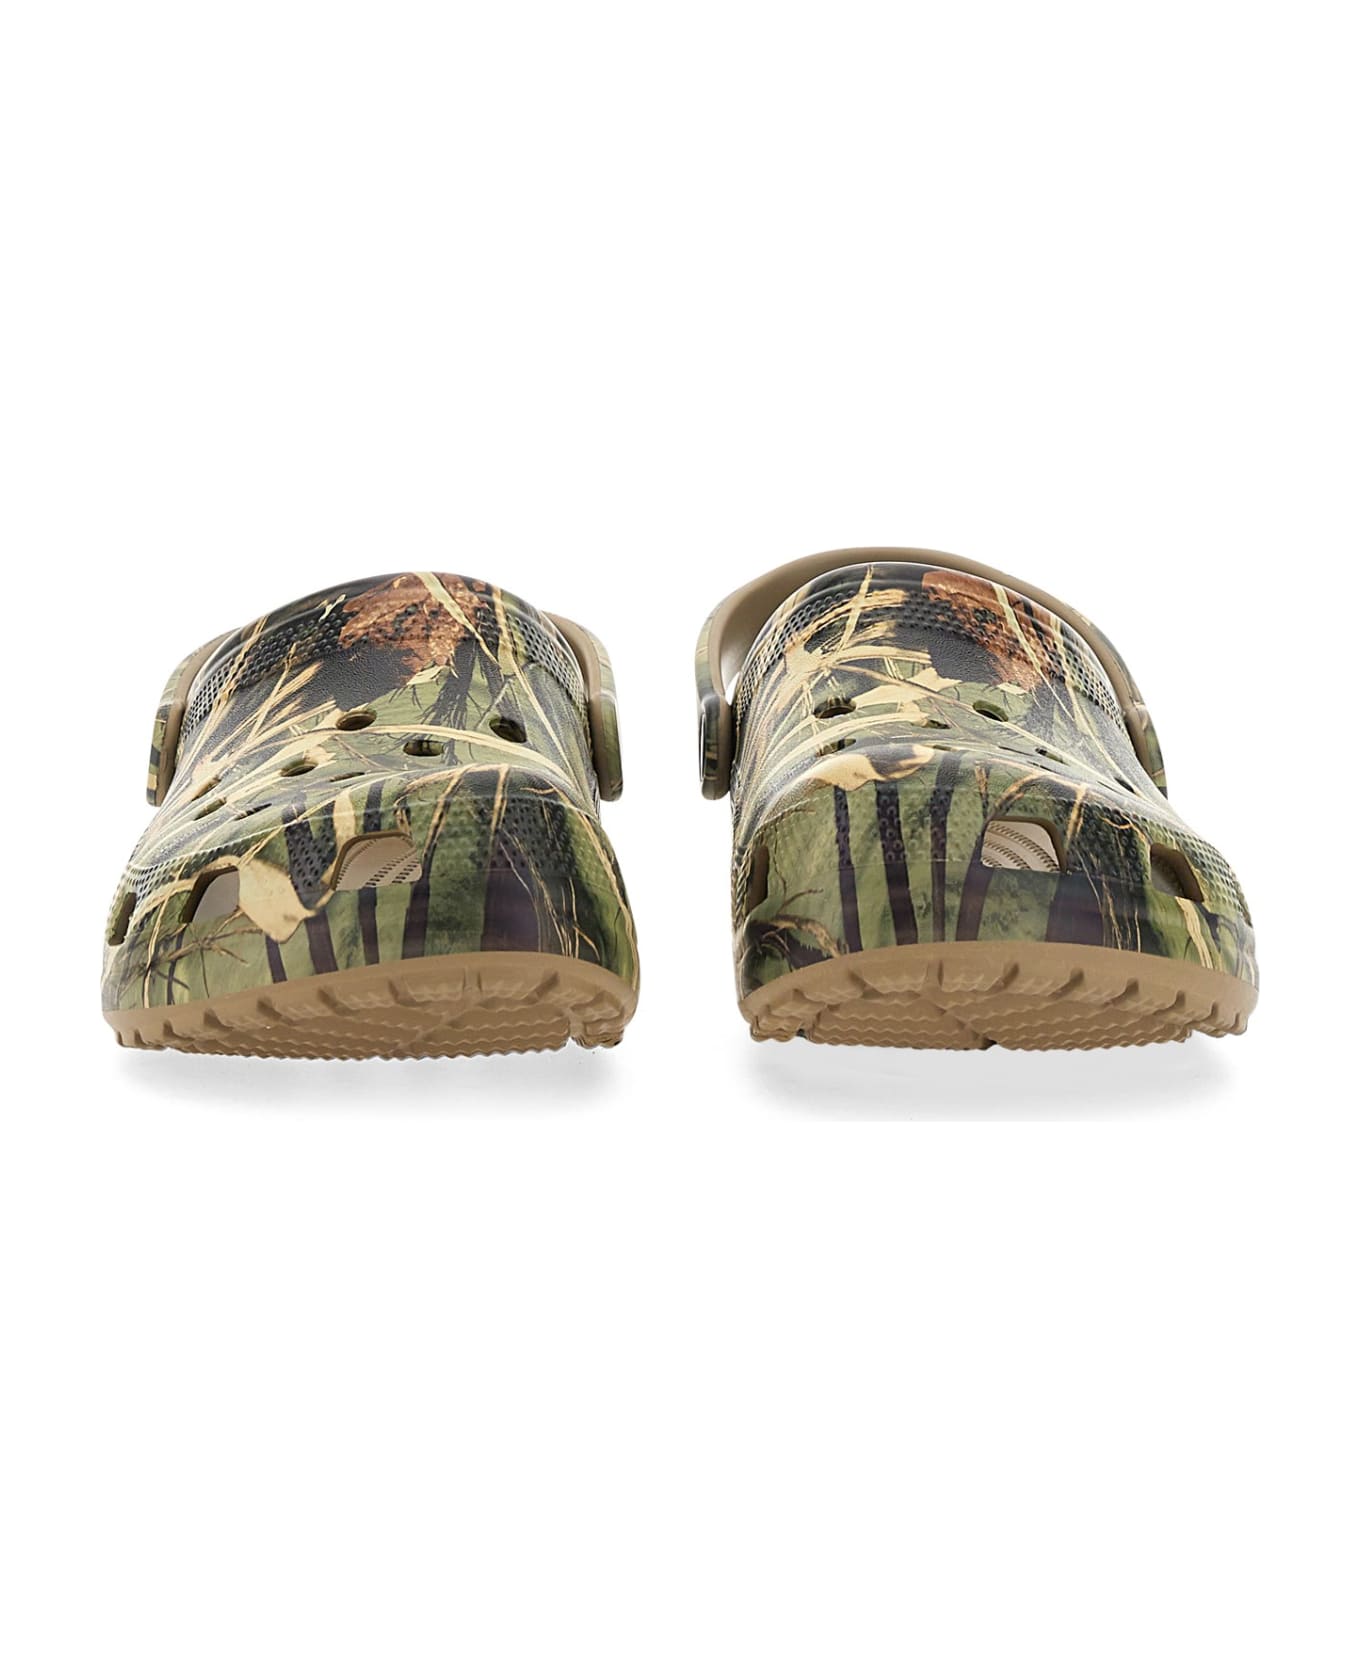 Crocs Clog With Camouflage Print